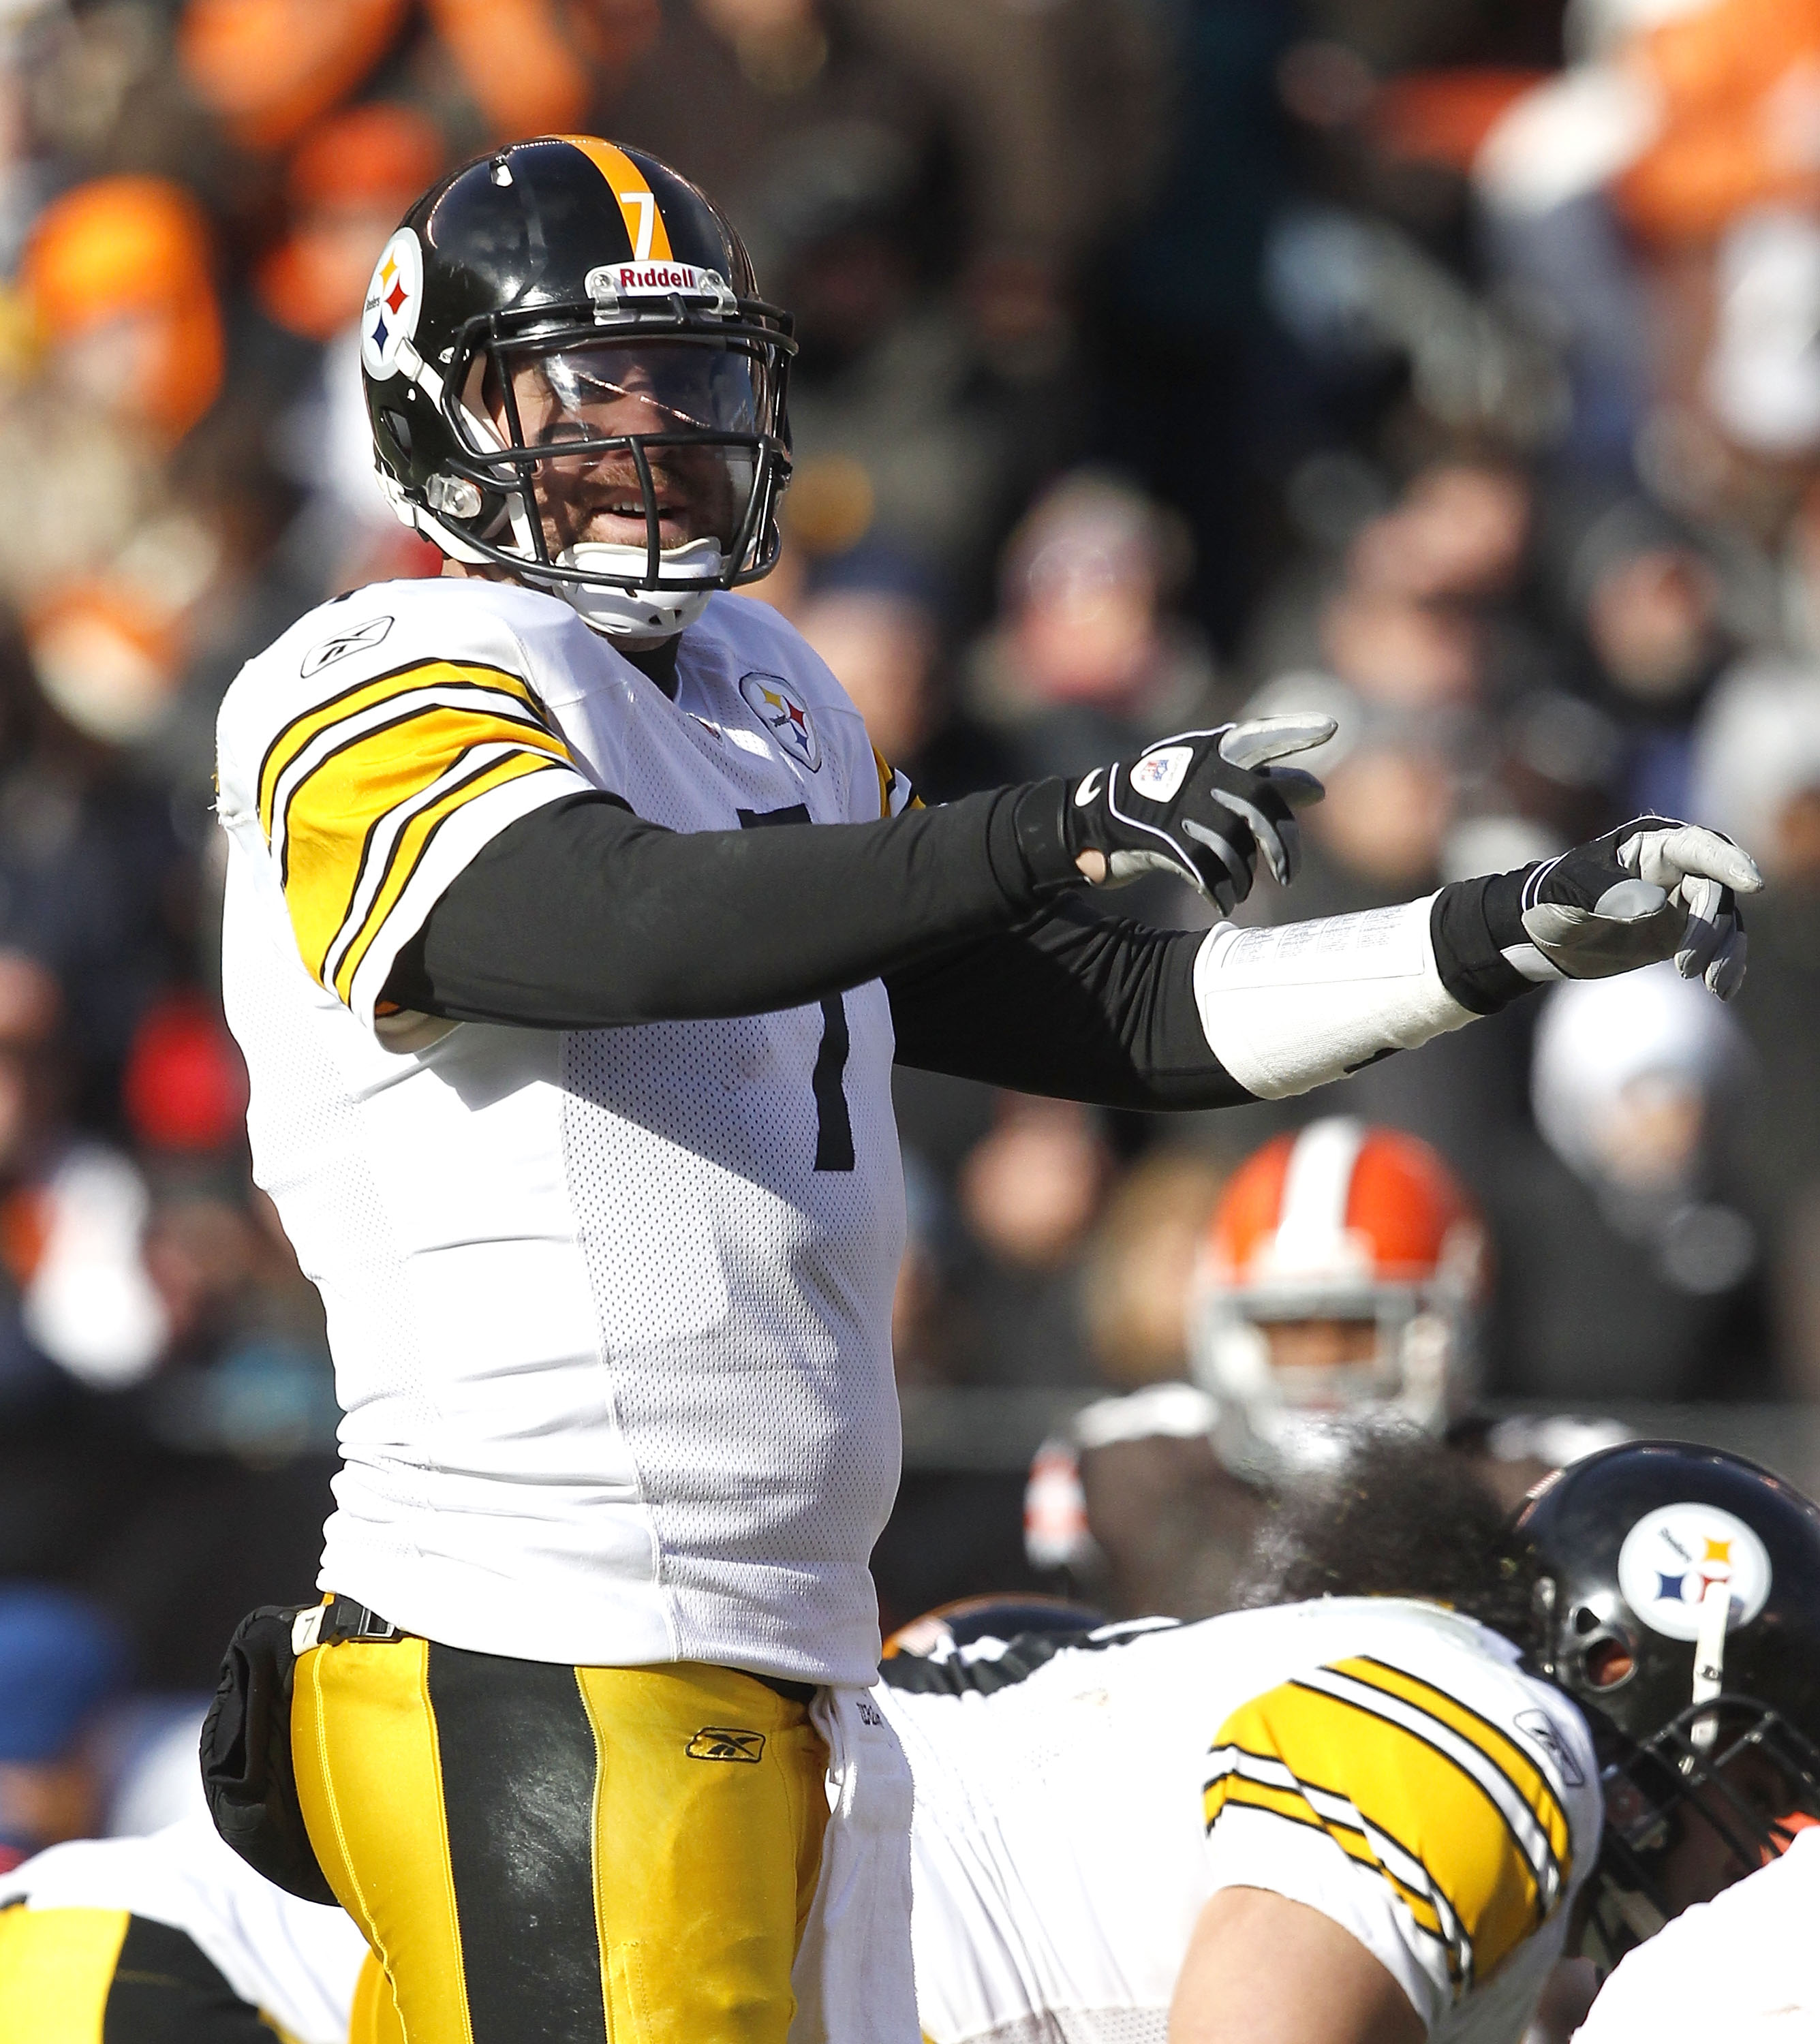 CLEVELAND, OH - JANUARY 02:  Quarterback Ben Roethlisberger #7 of the Pittsburgh Steelers calls a play against the Cleveland Browns at Cleveland Browns Stadium on January 2, 2011 in Cleveland, Ohio.  (Photo by Matt Sullivan/Getty Images)